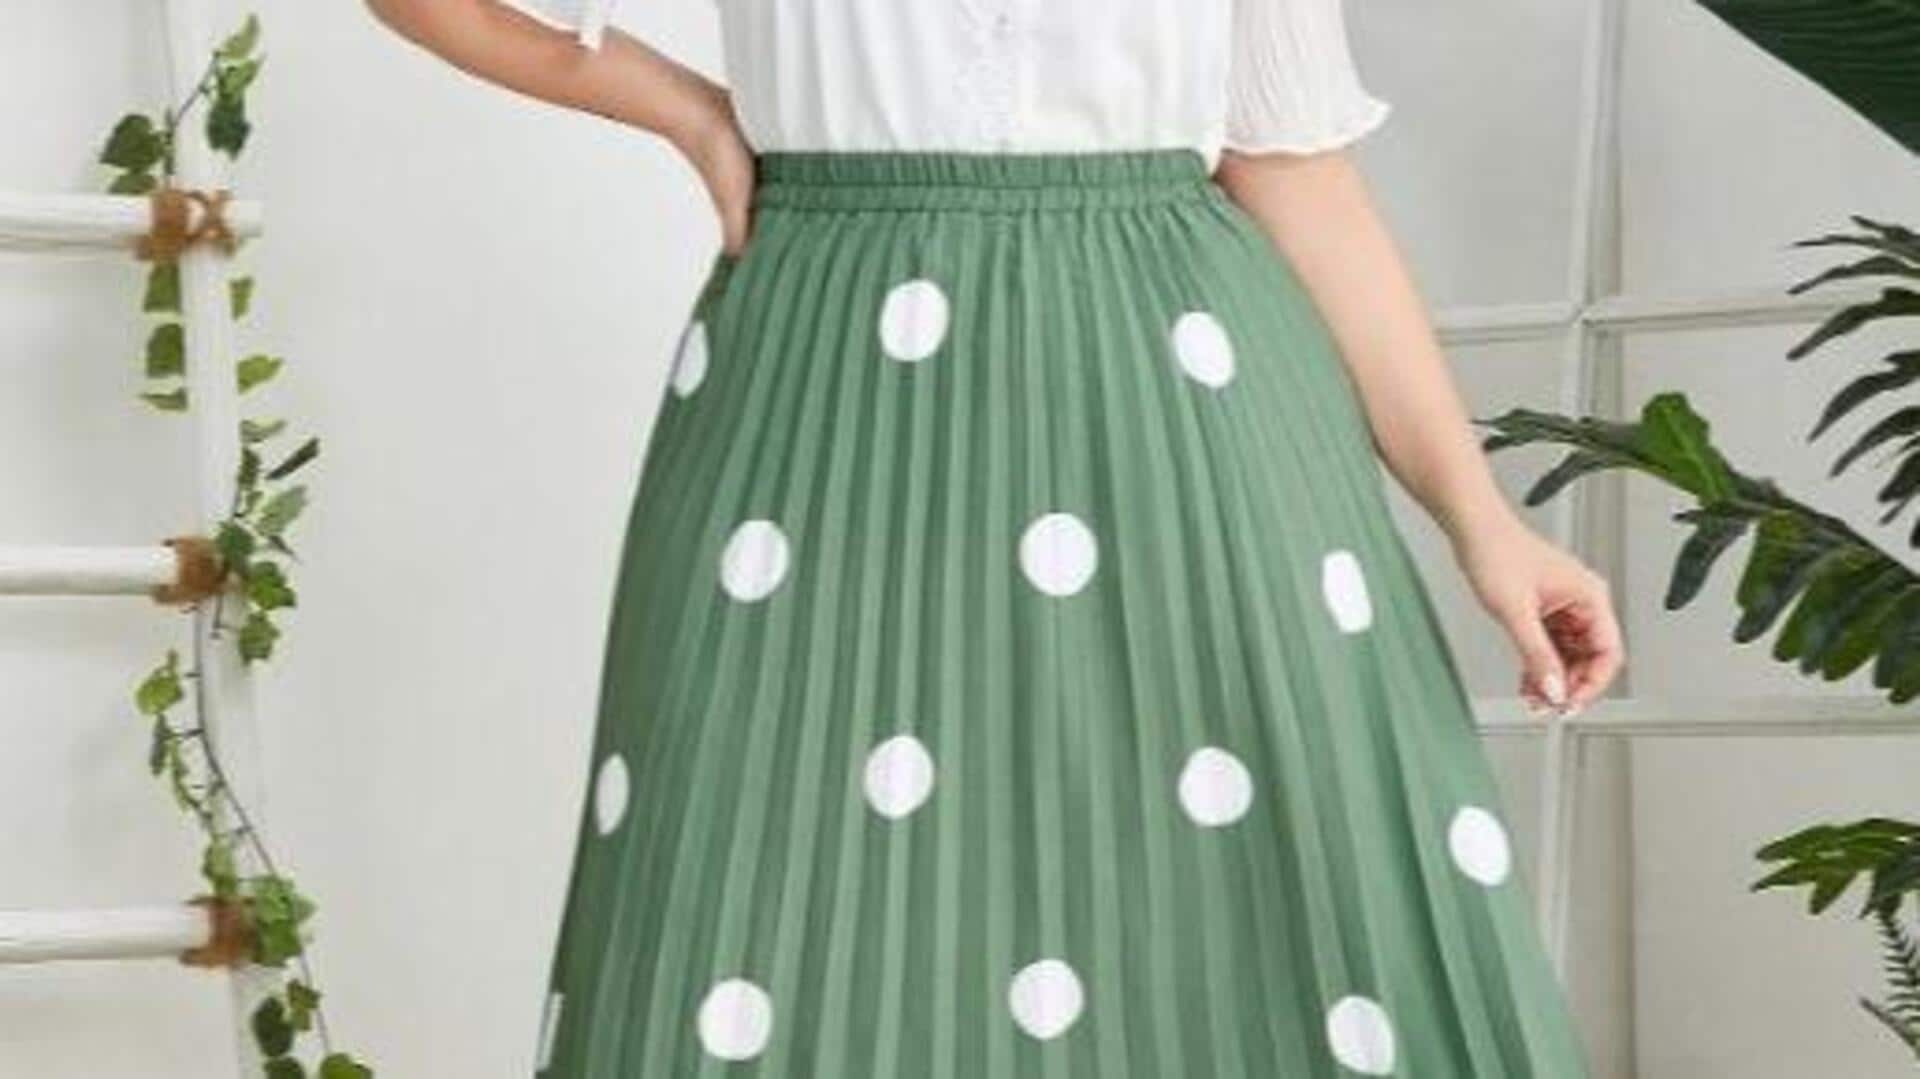 Retro pleats reimagined: Tips to style with them